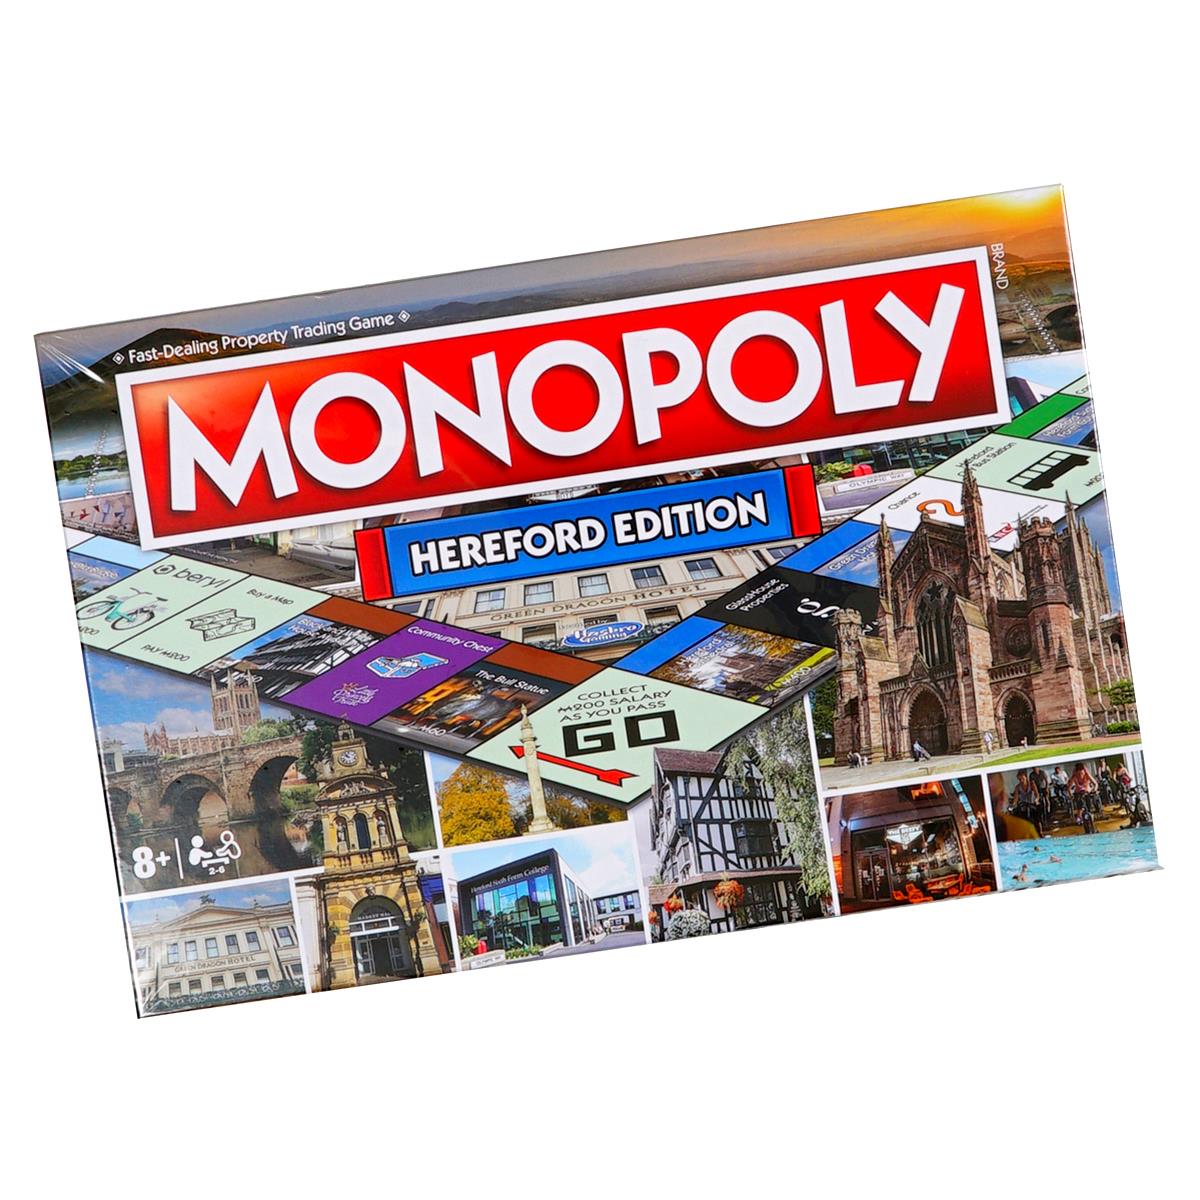 What is Hereford's claim to fame in the Hereford Monopoly game?